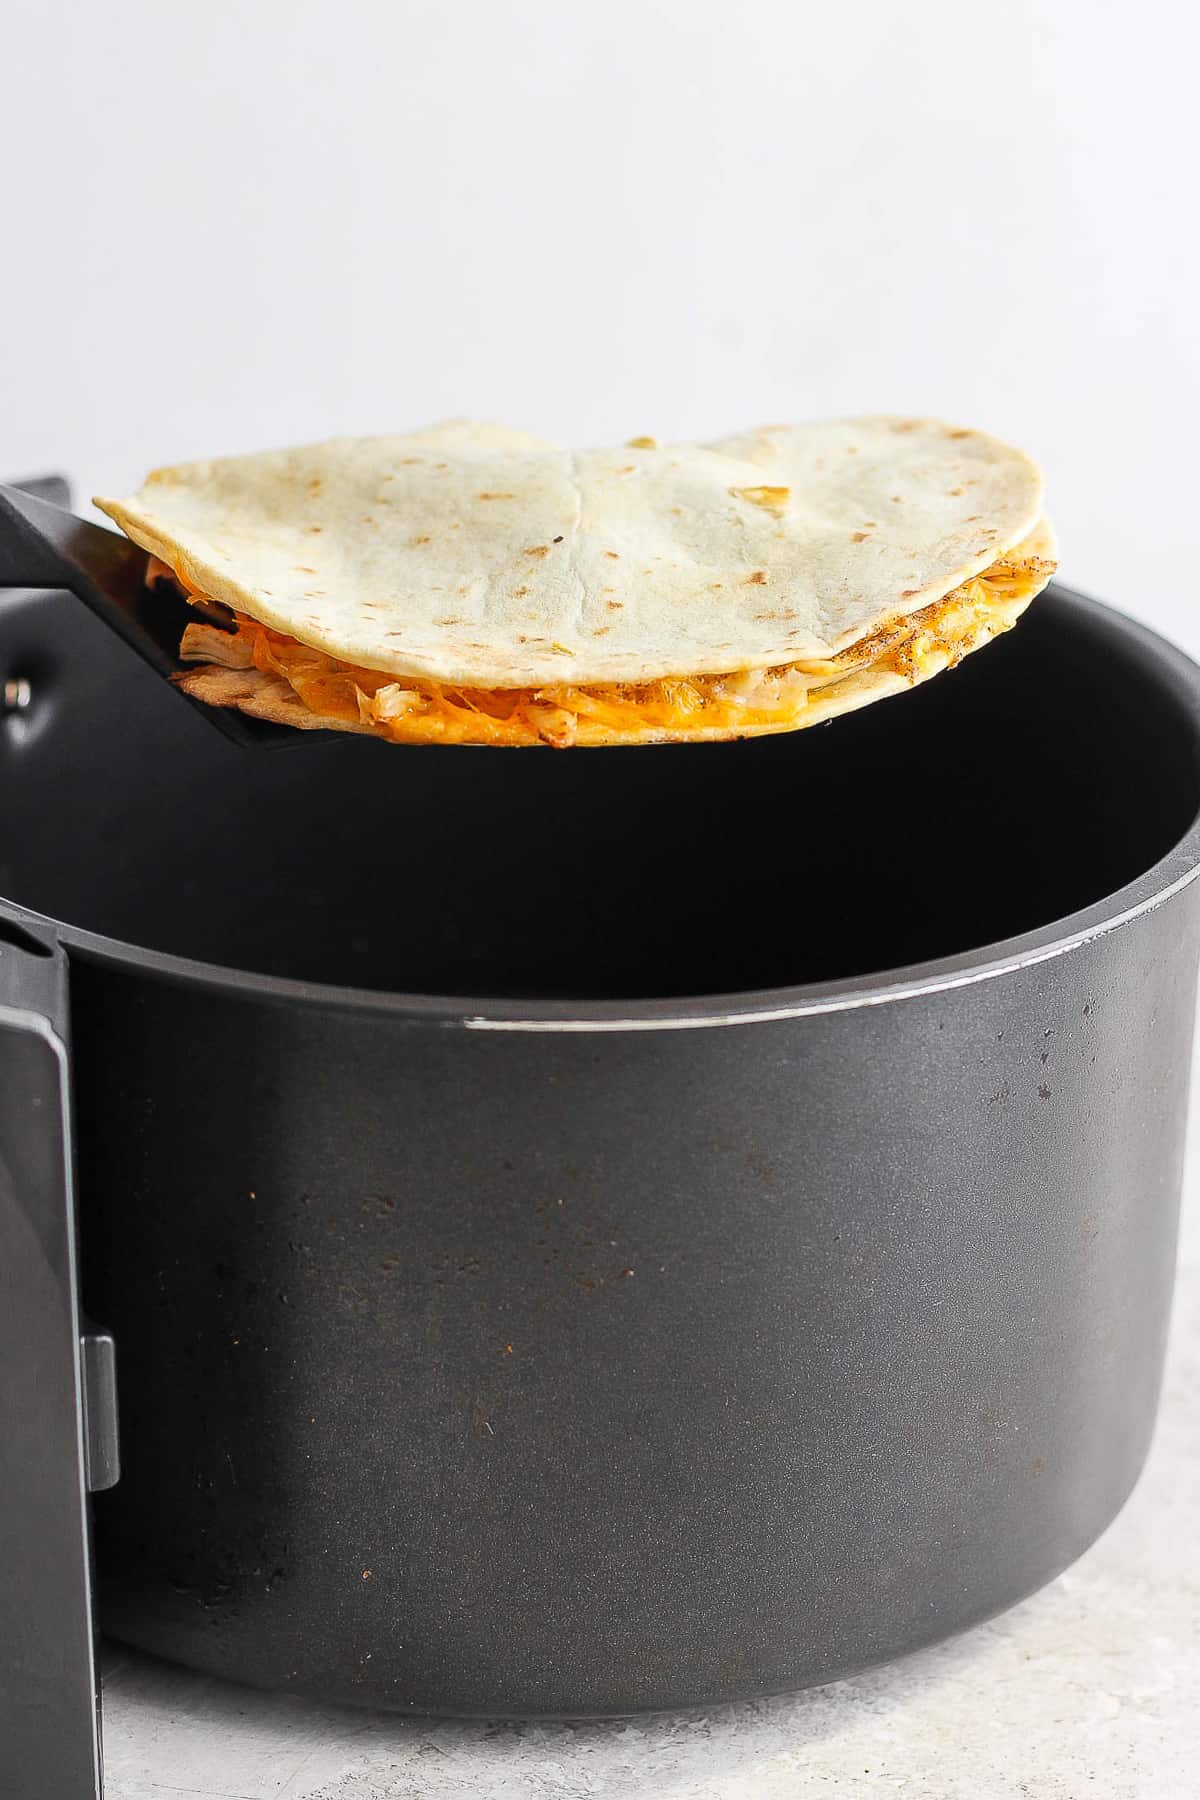 A quesadilla coming out of the air fryer.